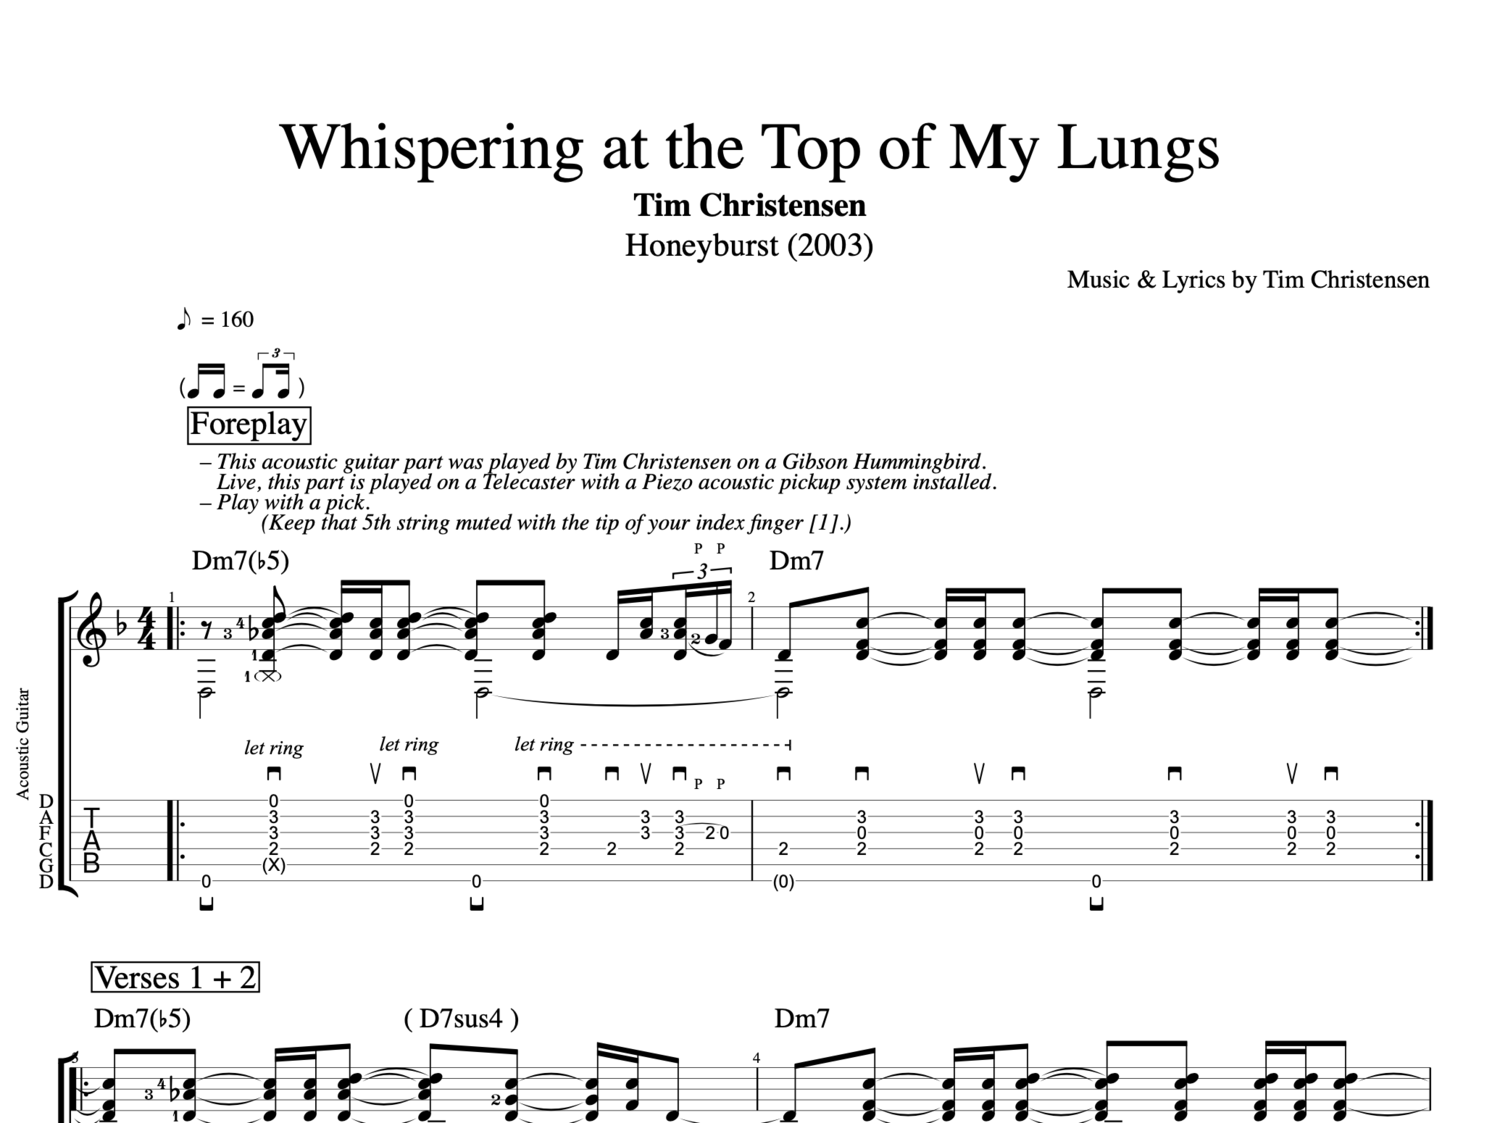 vej mytologi Kedelig "Whispering at the Top of My Lungs" · Tim Christensen || Guitar + Bass +  Keyboard || Tabs + Chords + Sheet music — Play Like The Greats .com